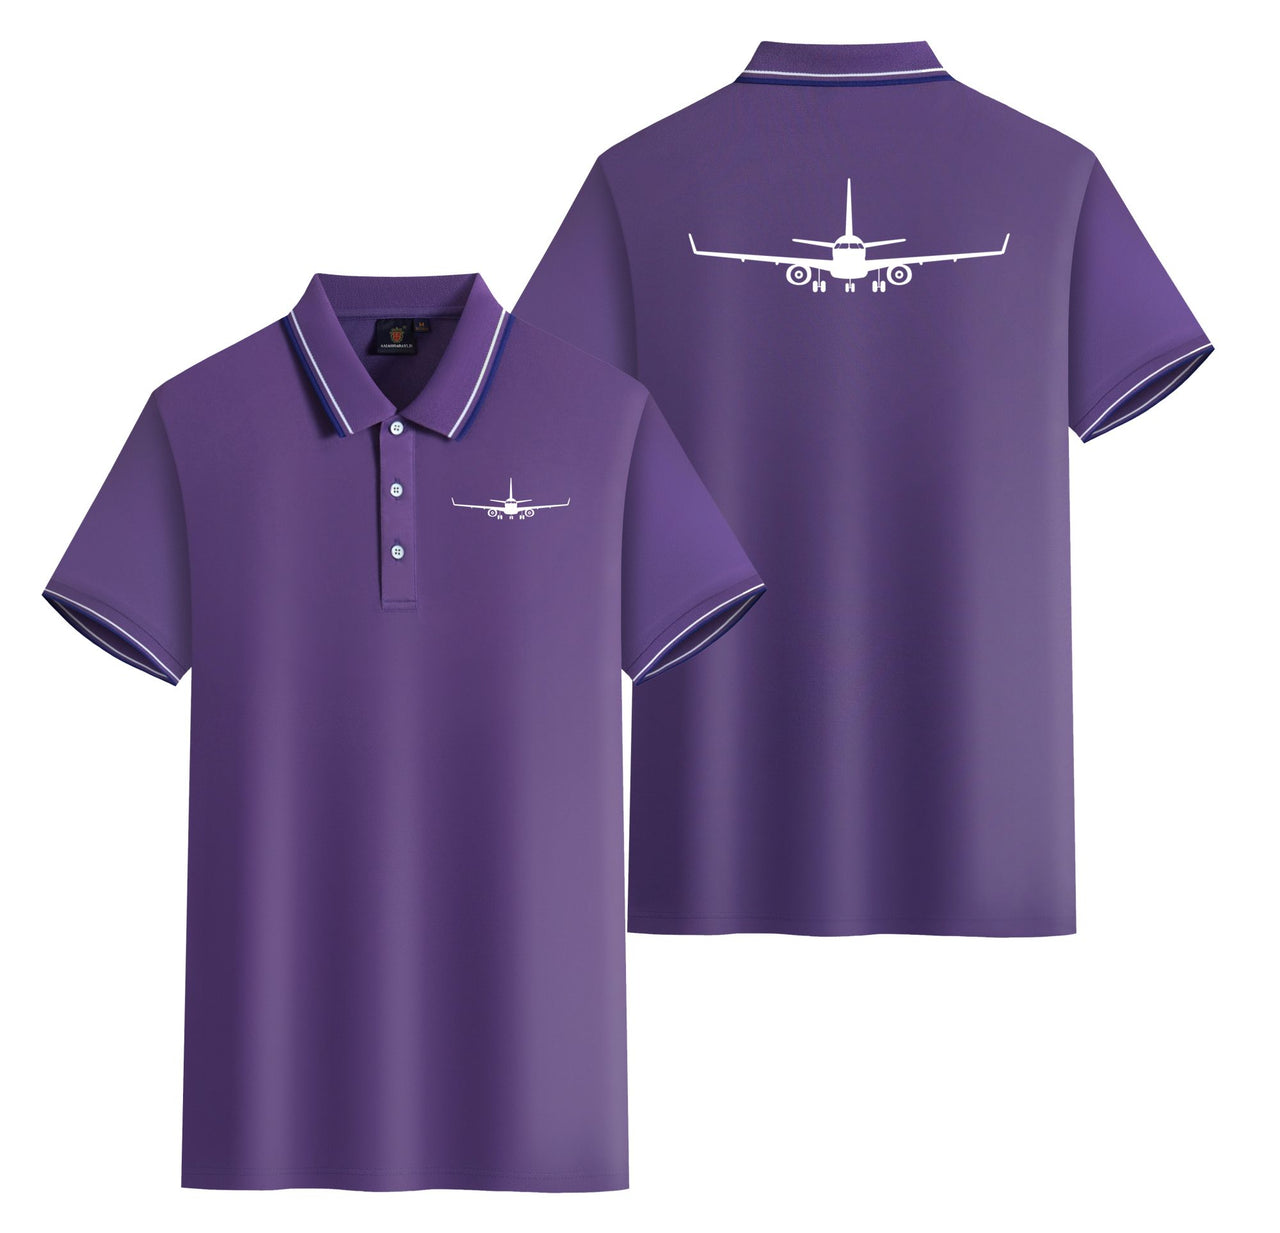 Embraer E-190 Silhouette Plane Designed Stylish Polo T-Shirts (Double-Side)